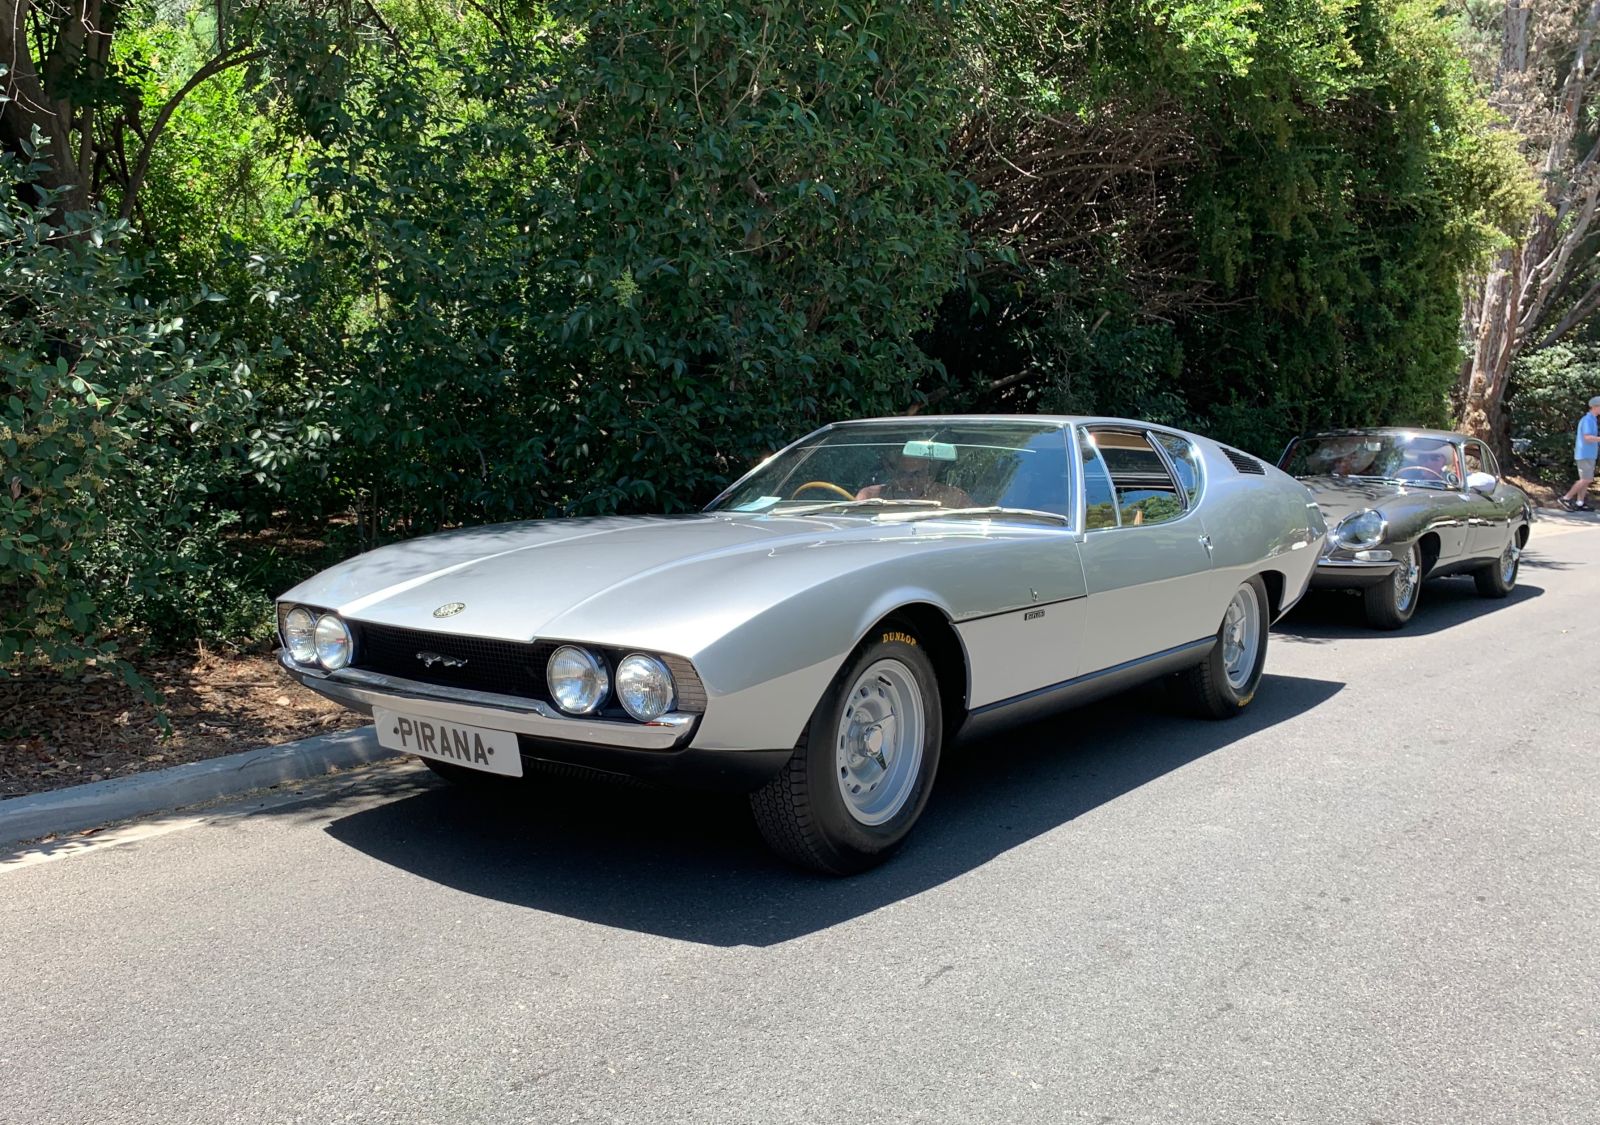 The one and only Jaguar (Bertone) Pirana (sic). This was a concept car built for the 1967 London Motor Show as a sort of Car of the Future. Designed by Marcello Gandini and based on an E-Type, Gandini pretty much recycled the design for the Lamborghini Espada.